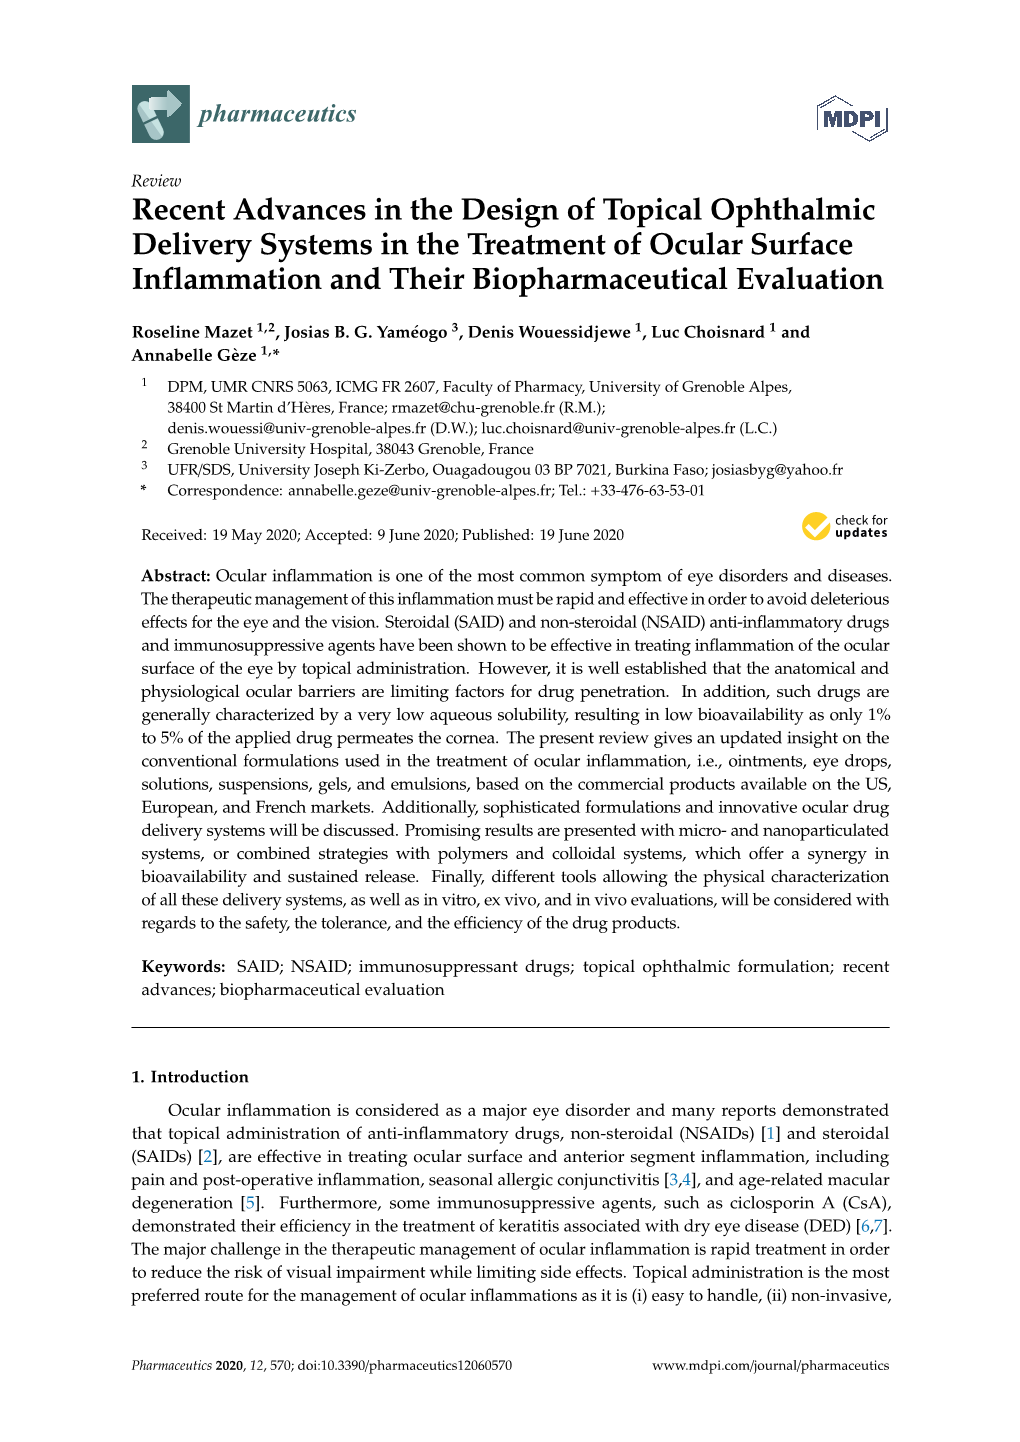 Recent Advances in the Design of Topical Ophthalmic Delivery Systems in the Treatment of Ocular Surface Inflammation and Their Biopharmaceutical Evaluation